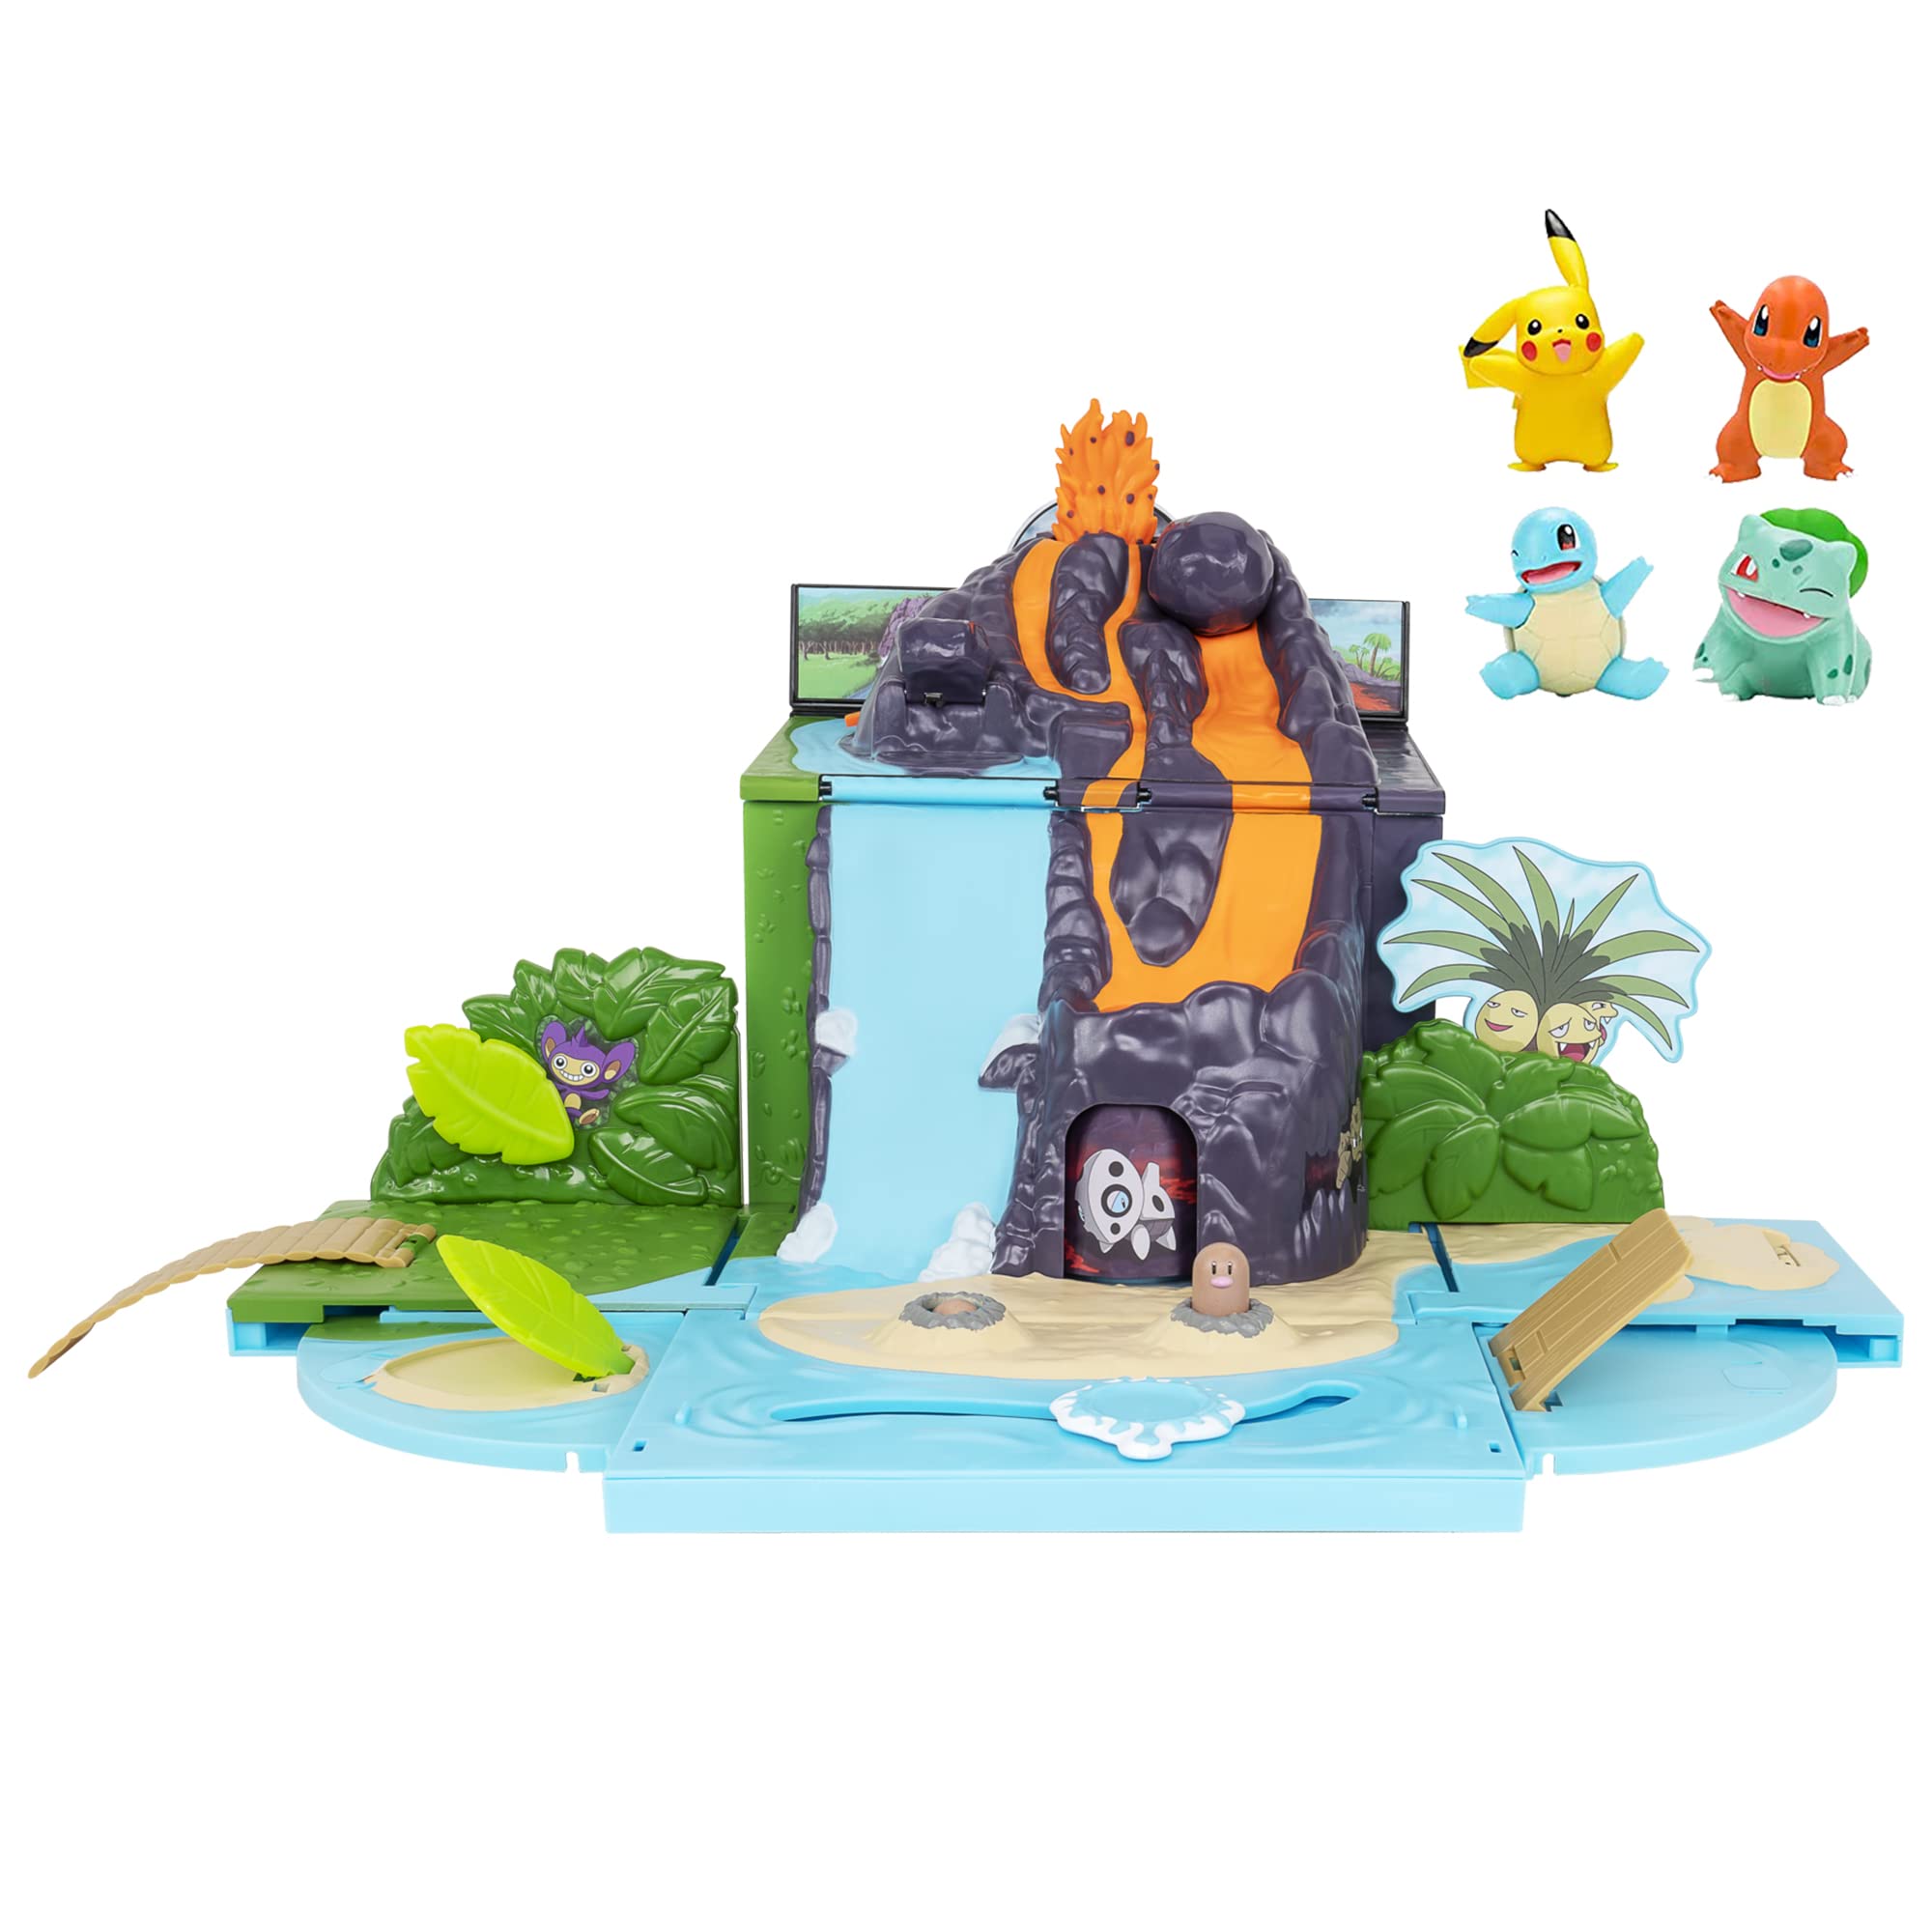 Pokemon Carry ‘N’ Go Volcano Playset with 4 Included 2-inch, Pikachu, Charmander, Bulbasaur, and Squirtle - Bring Everywhere - Playsets for Kids and Pokémon Fans - Amazon Exclusive